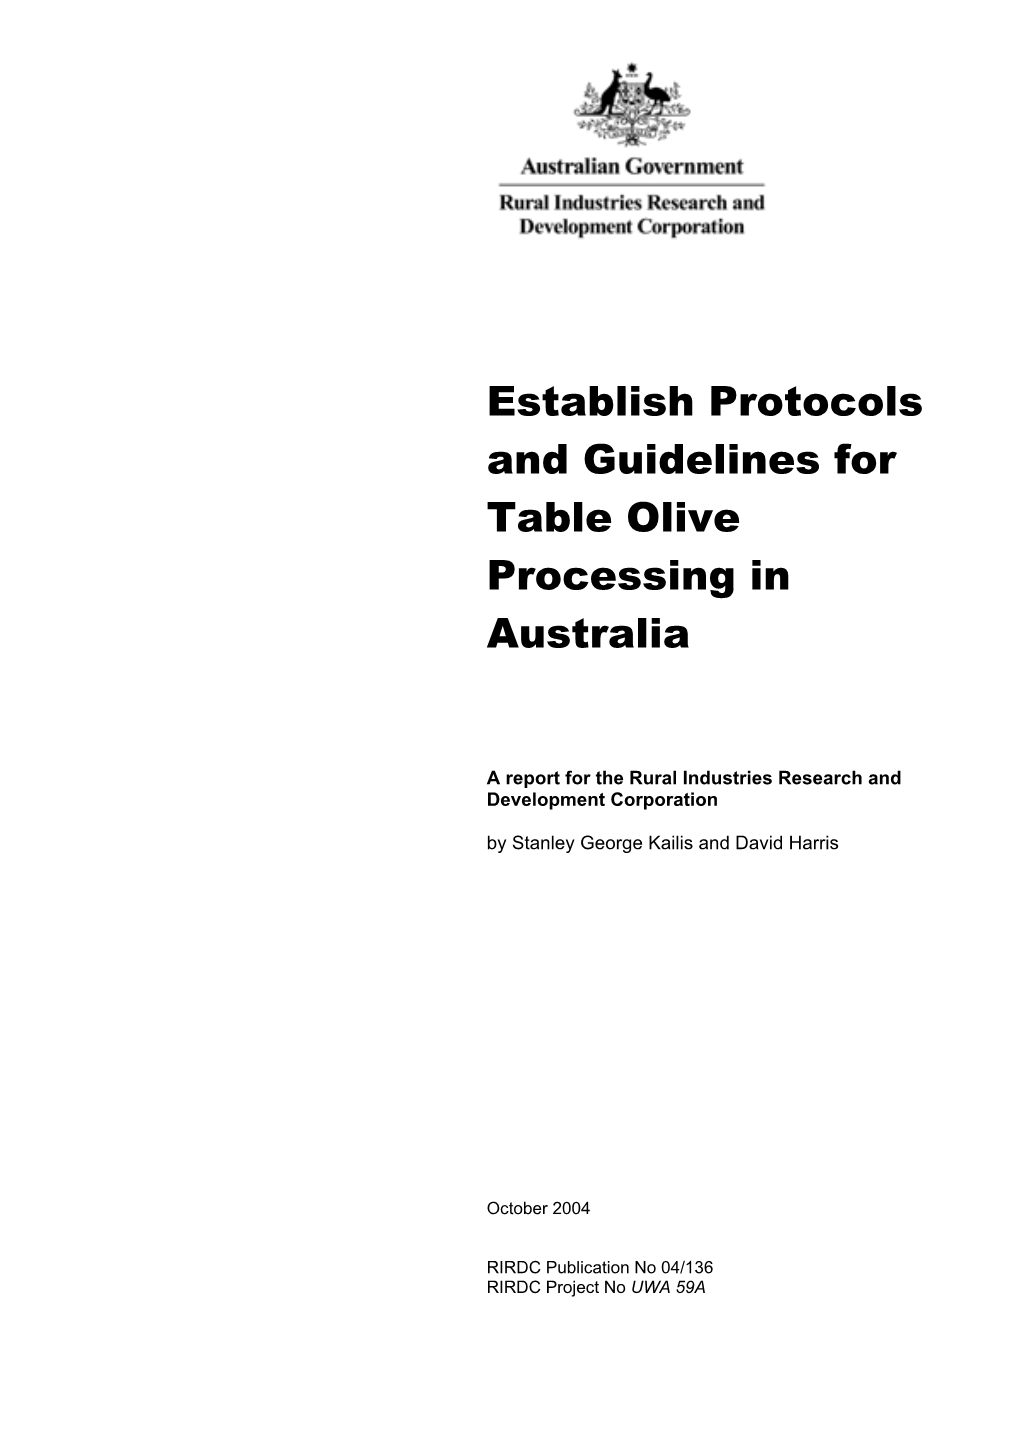 Establish Protocols and Guidelines for Table Olive Processing in Australia